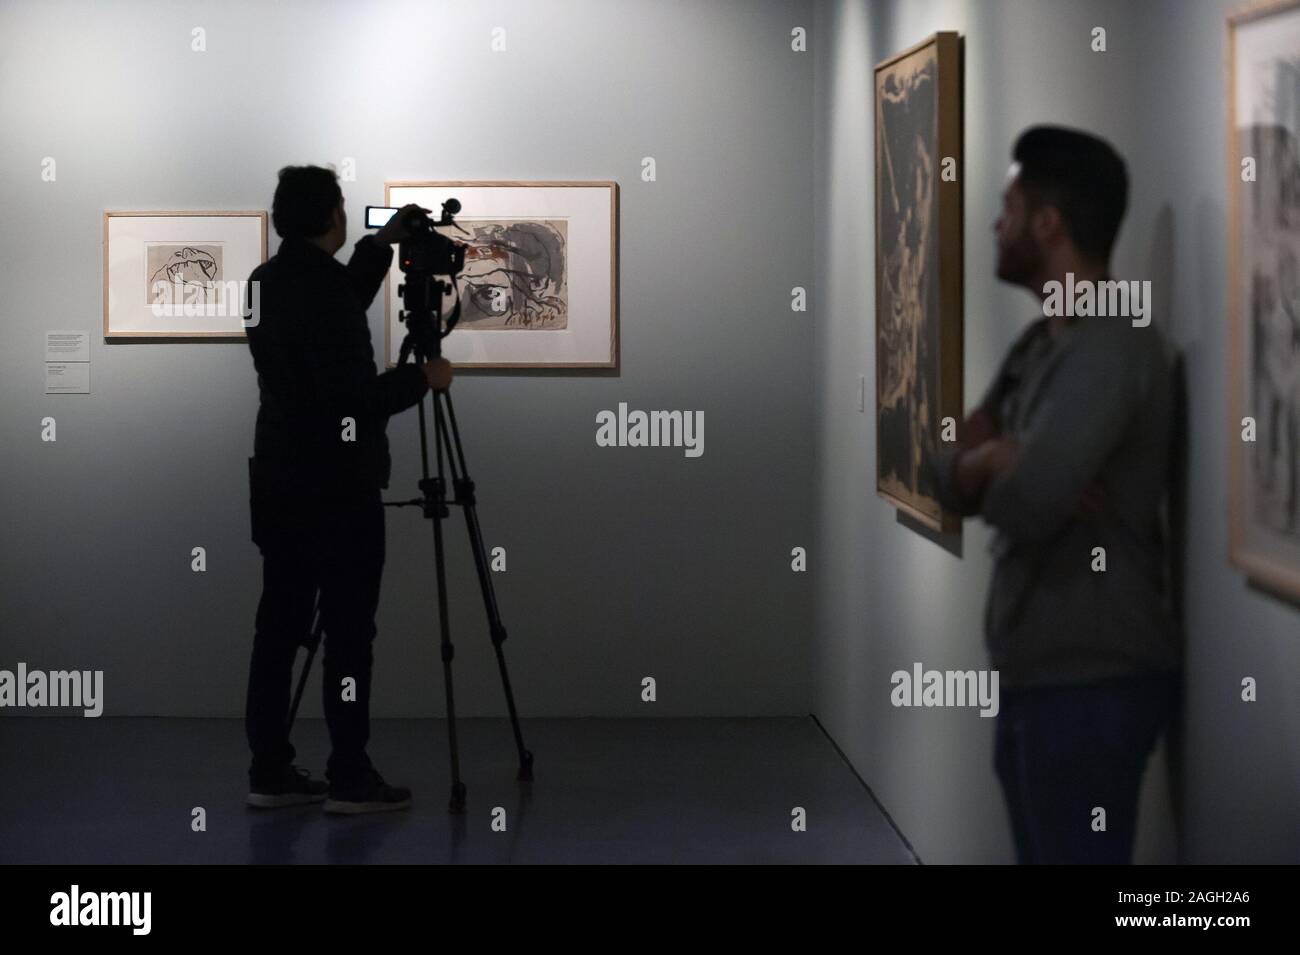 A cameraman recording images during the exhibition.'Alechinsky: en el país de la tinta' (Alechinsky in inkland) is an exhibition of paintings and drawings by Belgian artist, Pierre Alechinsky at museum Centre Pompidou. The exhibition runs from 19th Dec 2019 to 12th April 2020. Stock Photo